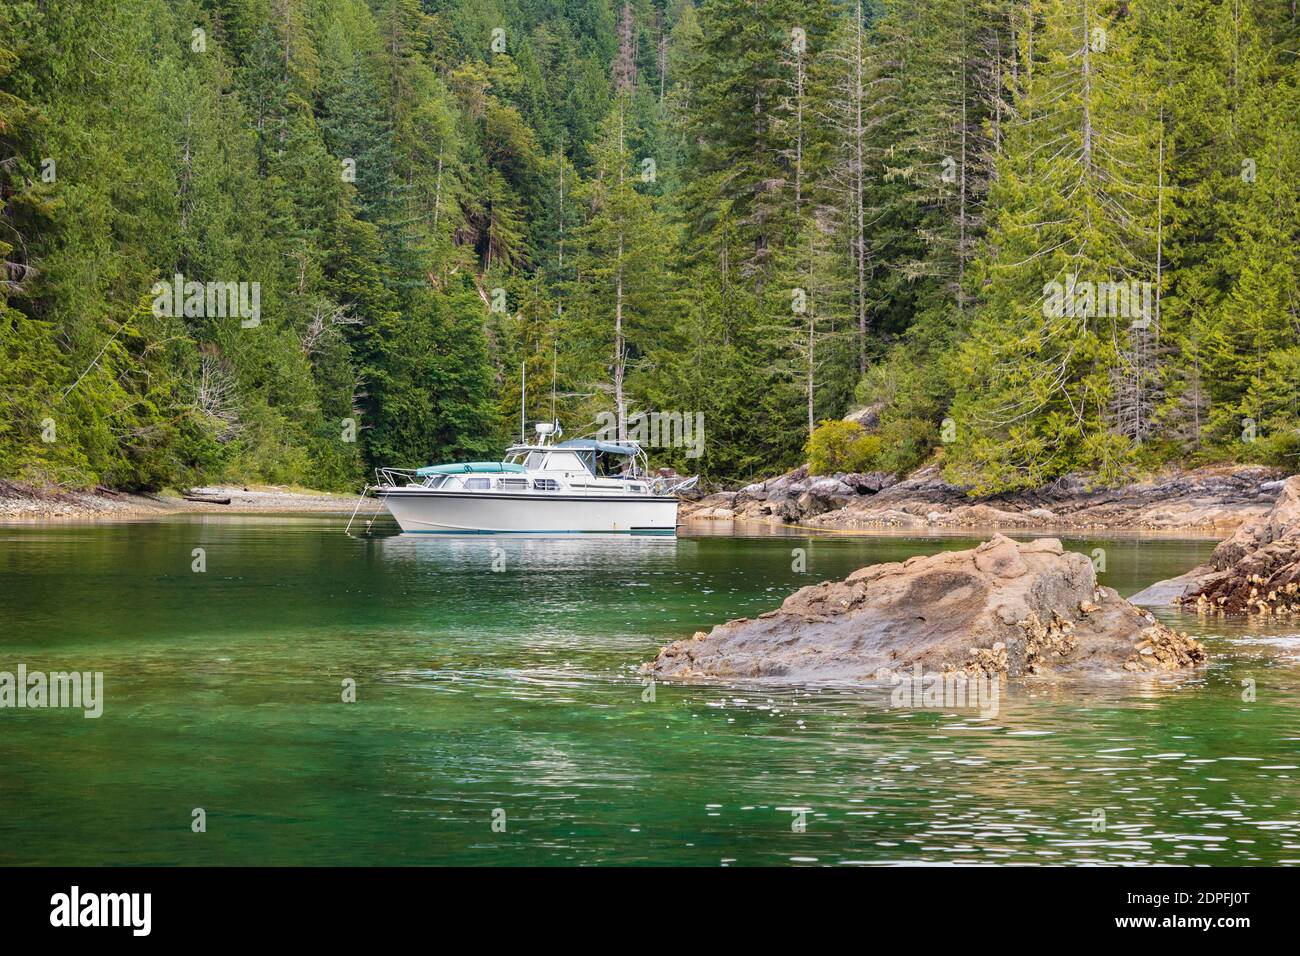 A pleasure boat is anchored in a quiet cove in coastal British Columbia, with a rocky reef in the foreground and dense forest in the background. Stock Photo